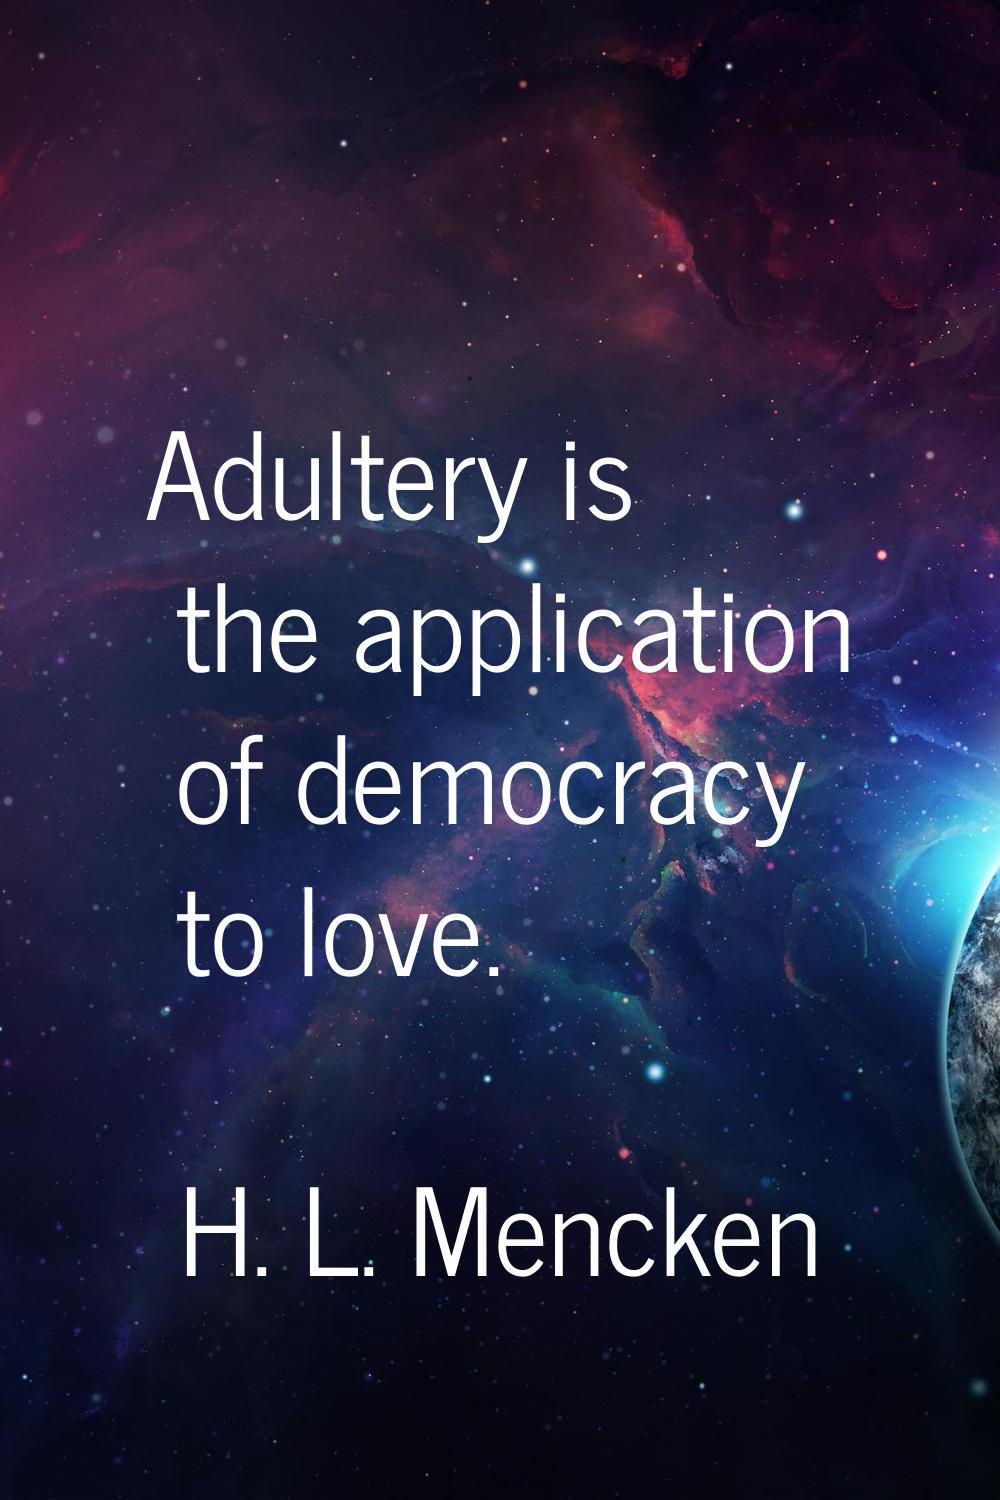 Adultery is the application of democracy to love.